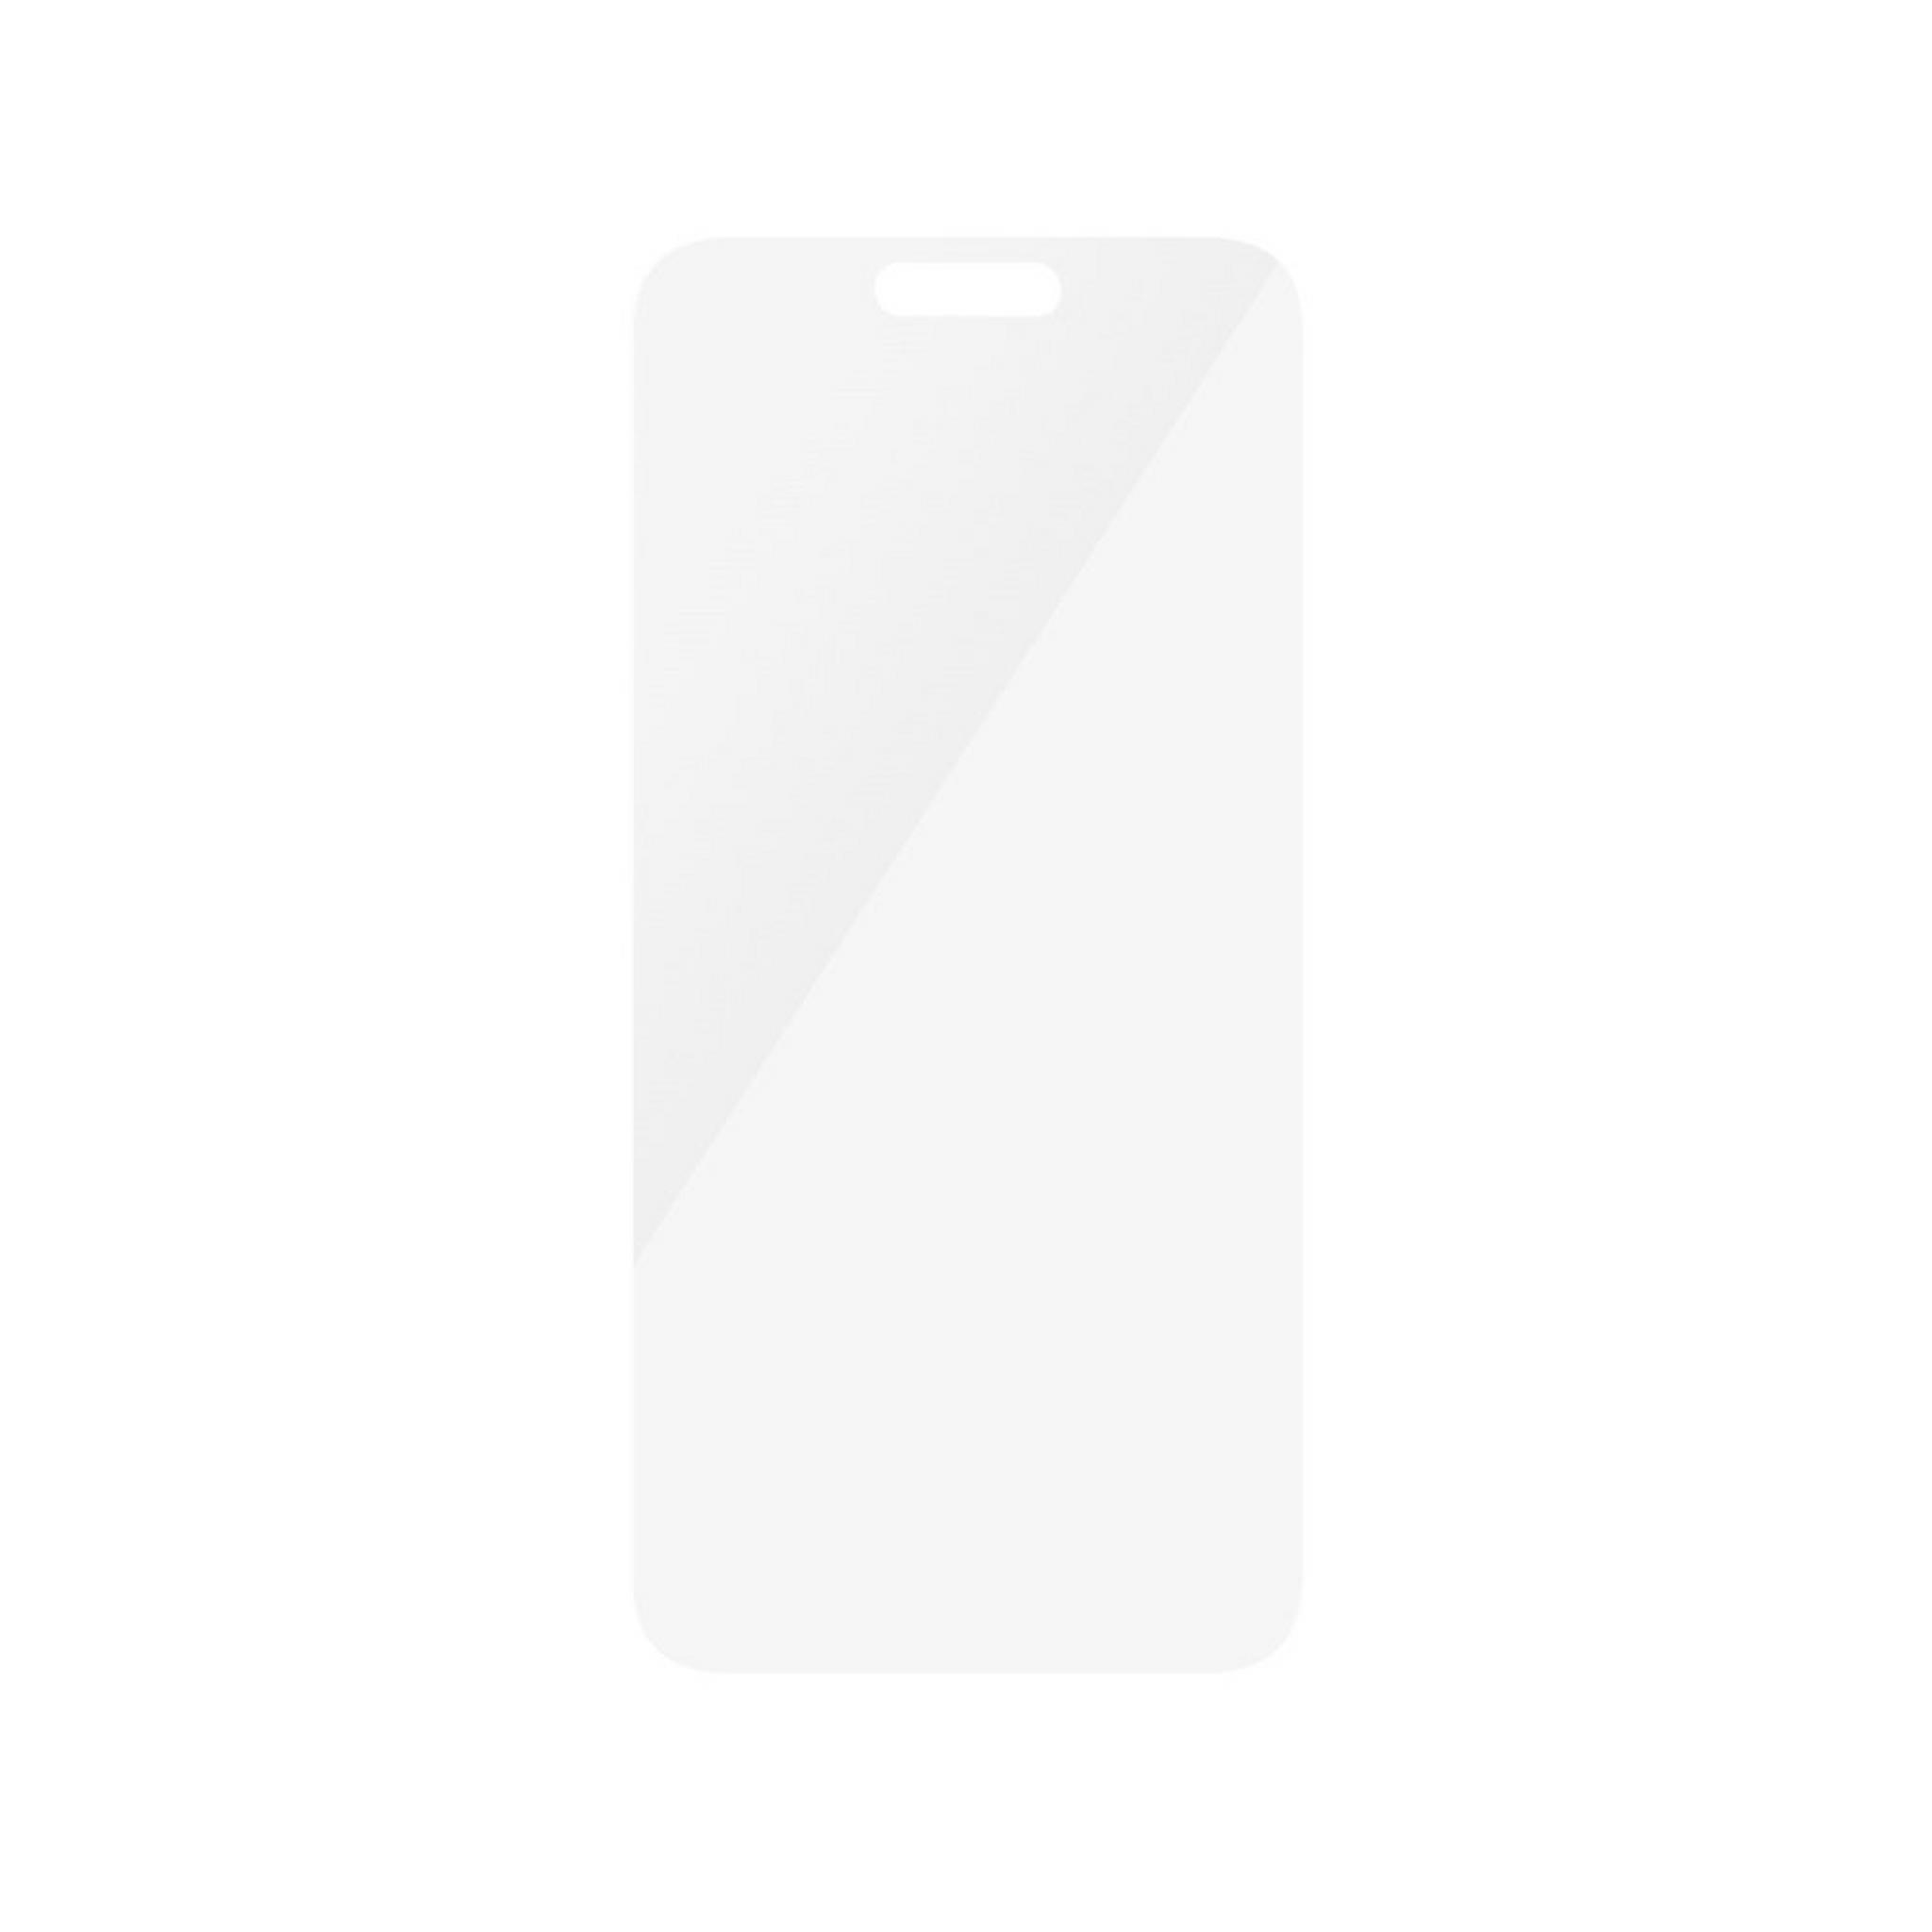 PanzerGlass Screen Protector Ultra Wide Fit for iPhone 15 Plus, 2811 - Clear